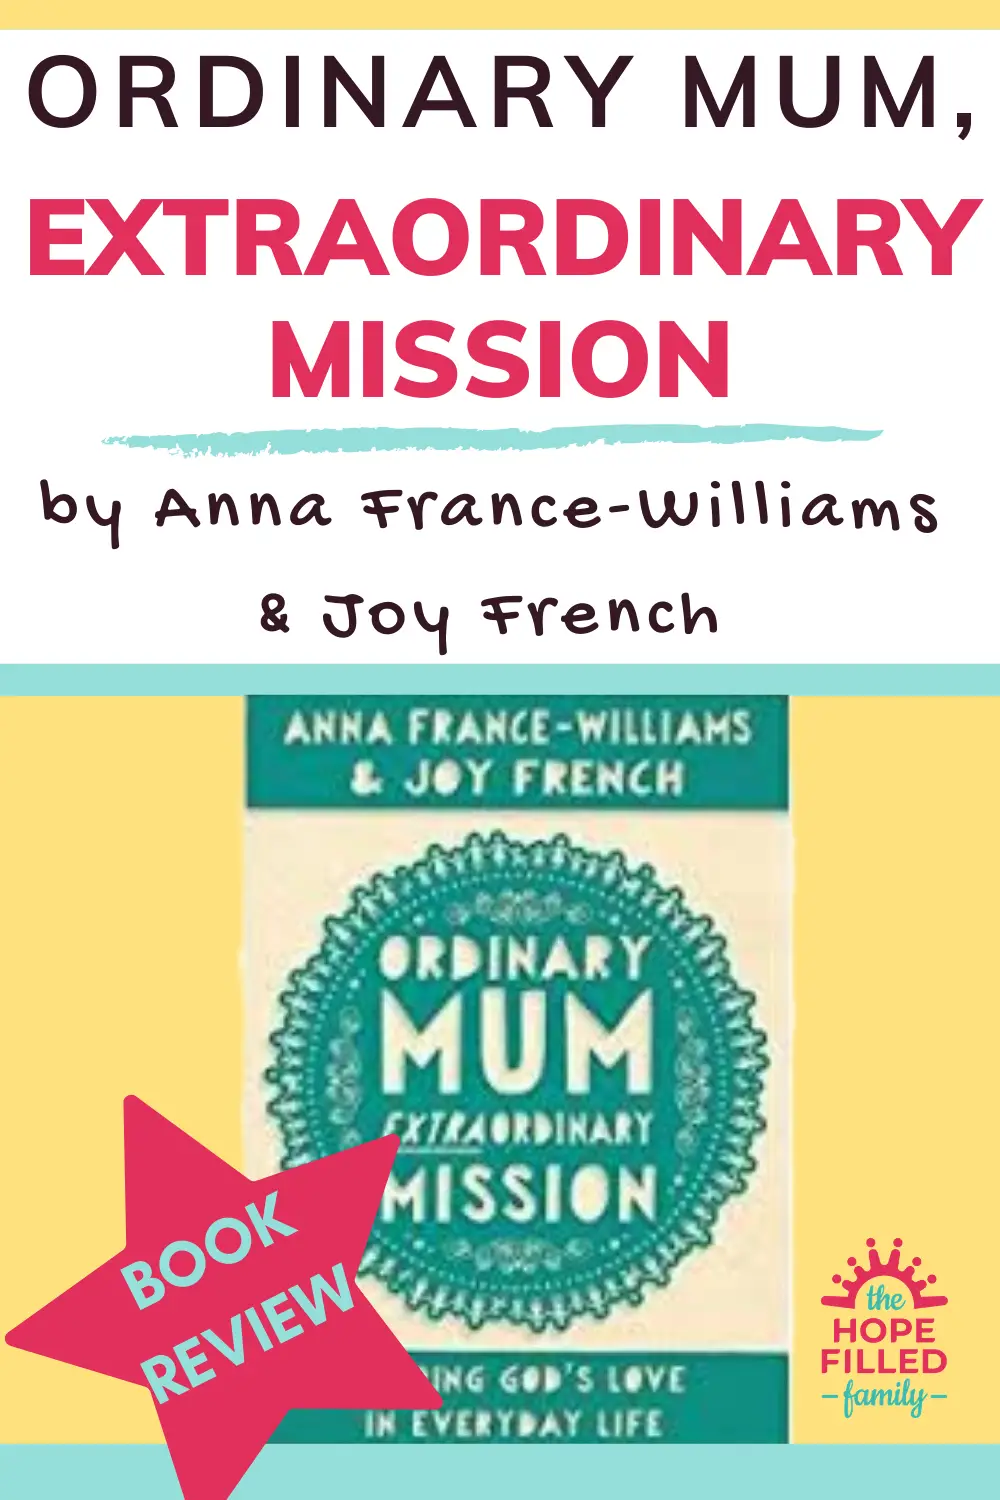 Ordinary Mum, Extraordinary Mission by Anna France-Williams and Joy French - book review by The Hope-Filled Family, UK Christian Parenting and Adoption blog.